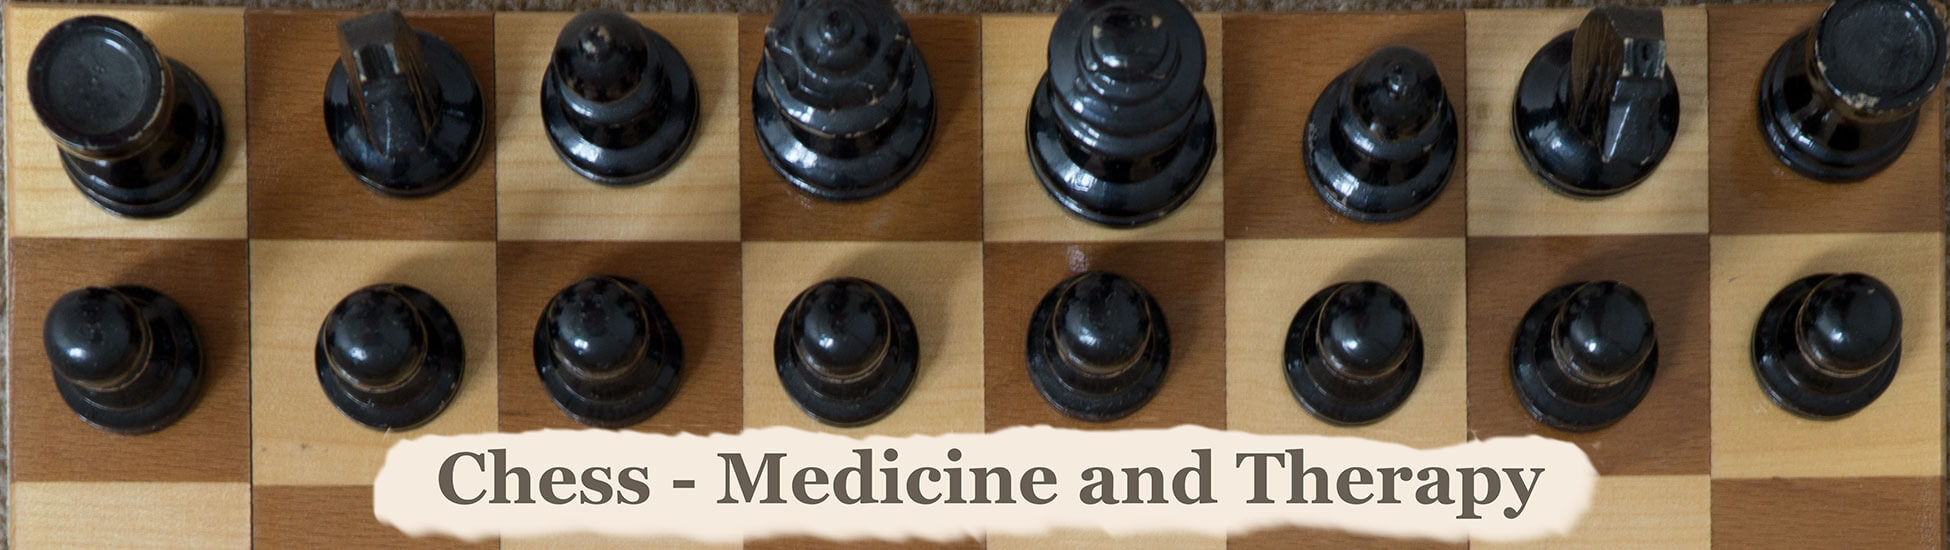 chess in medicine and therapy